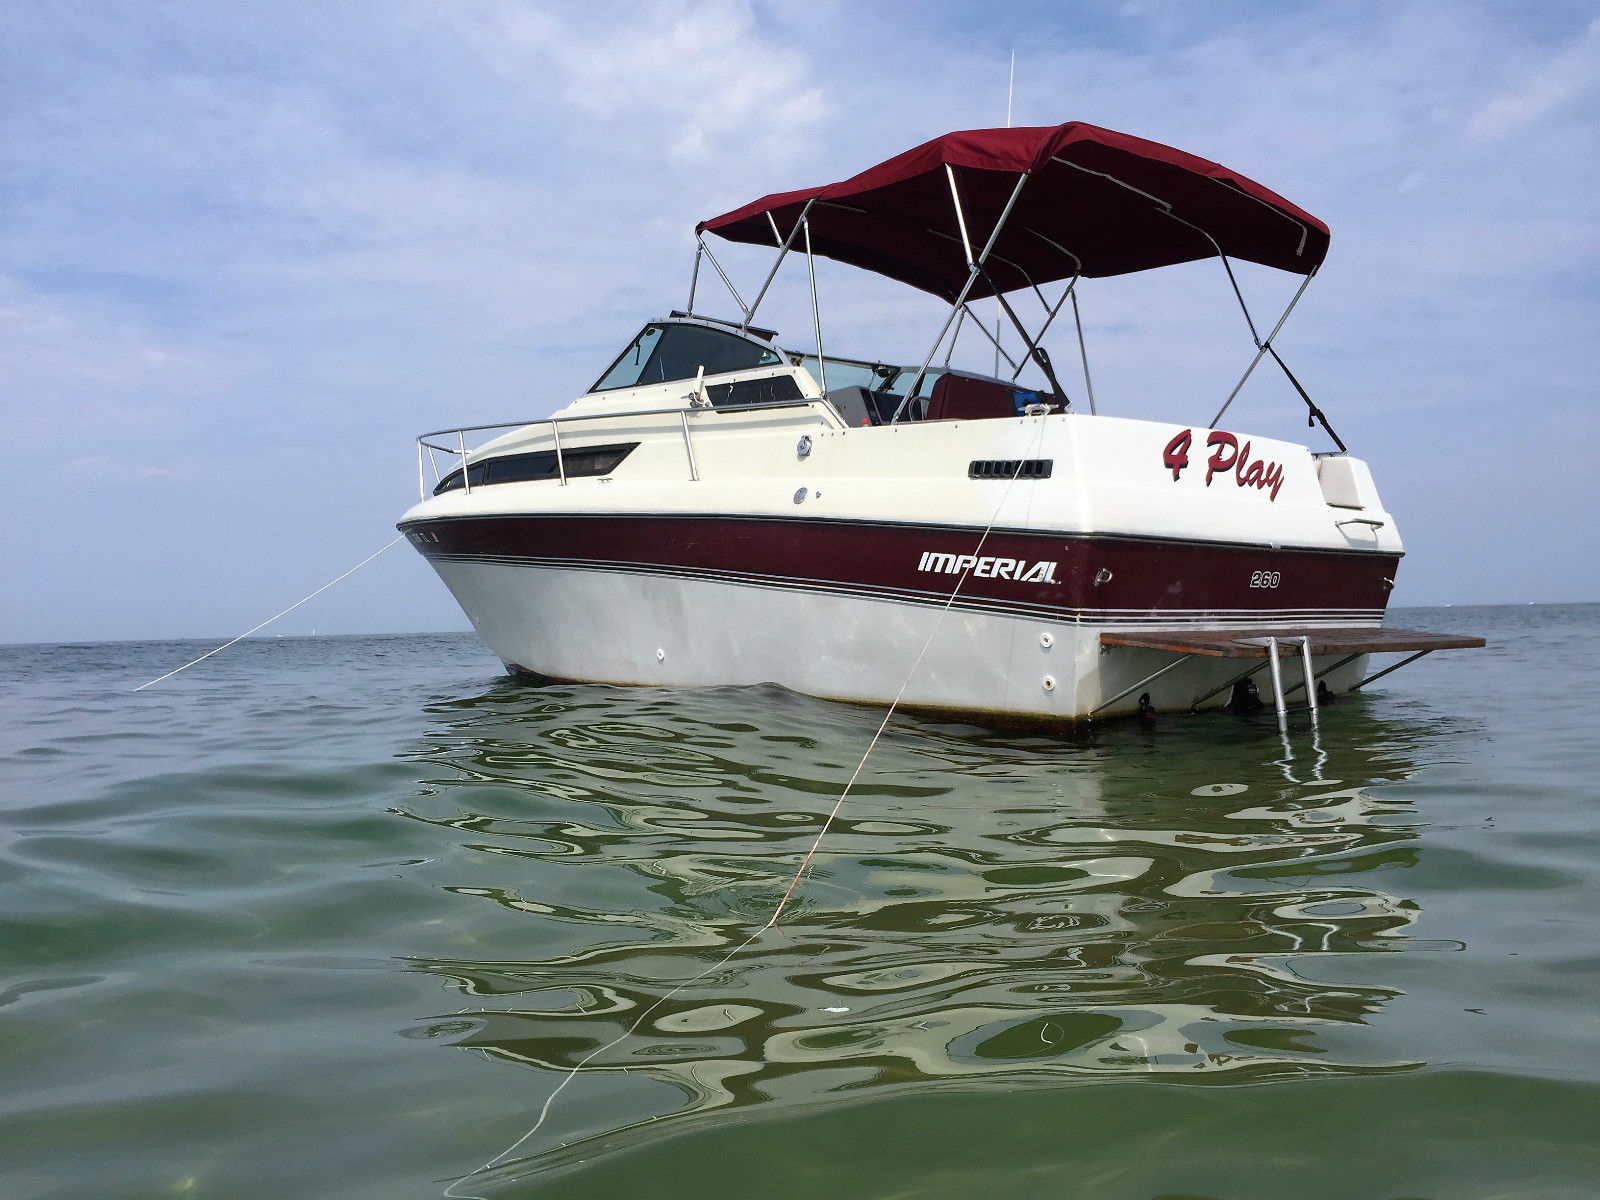 Sleeps 6, has stove top, sink, refrigerator, shower... boat, USA, for sale....